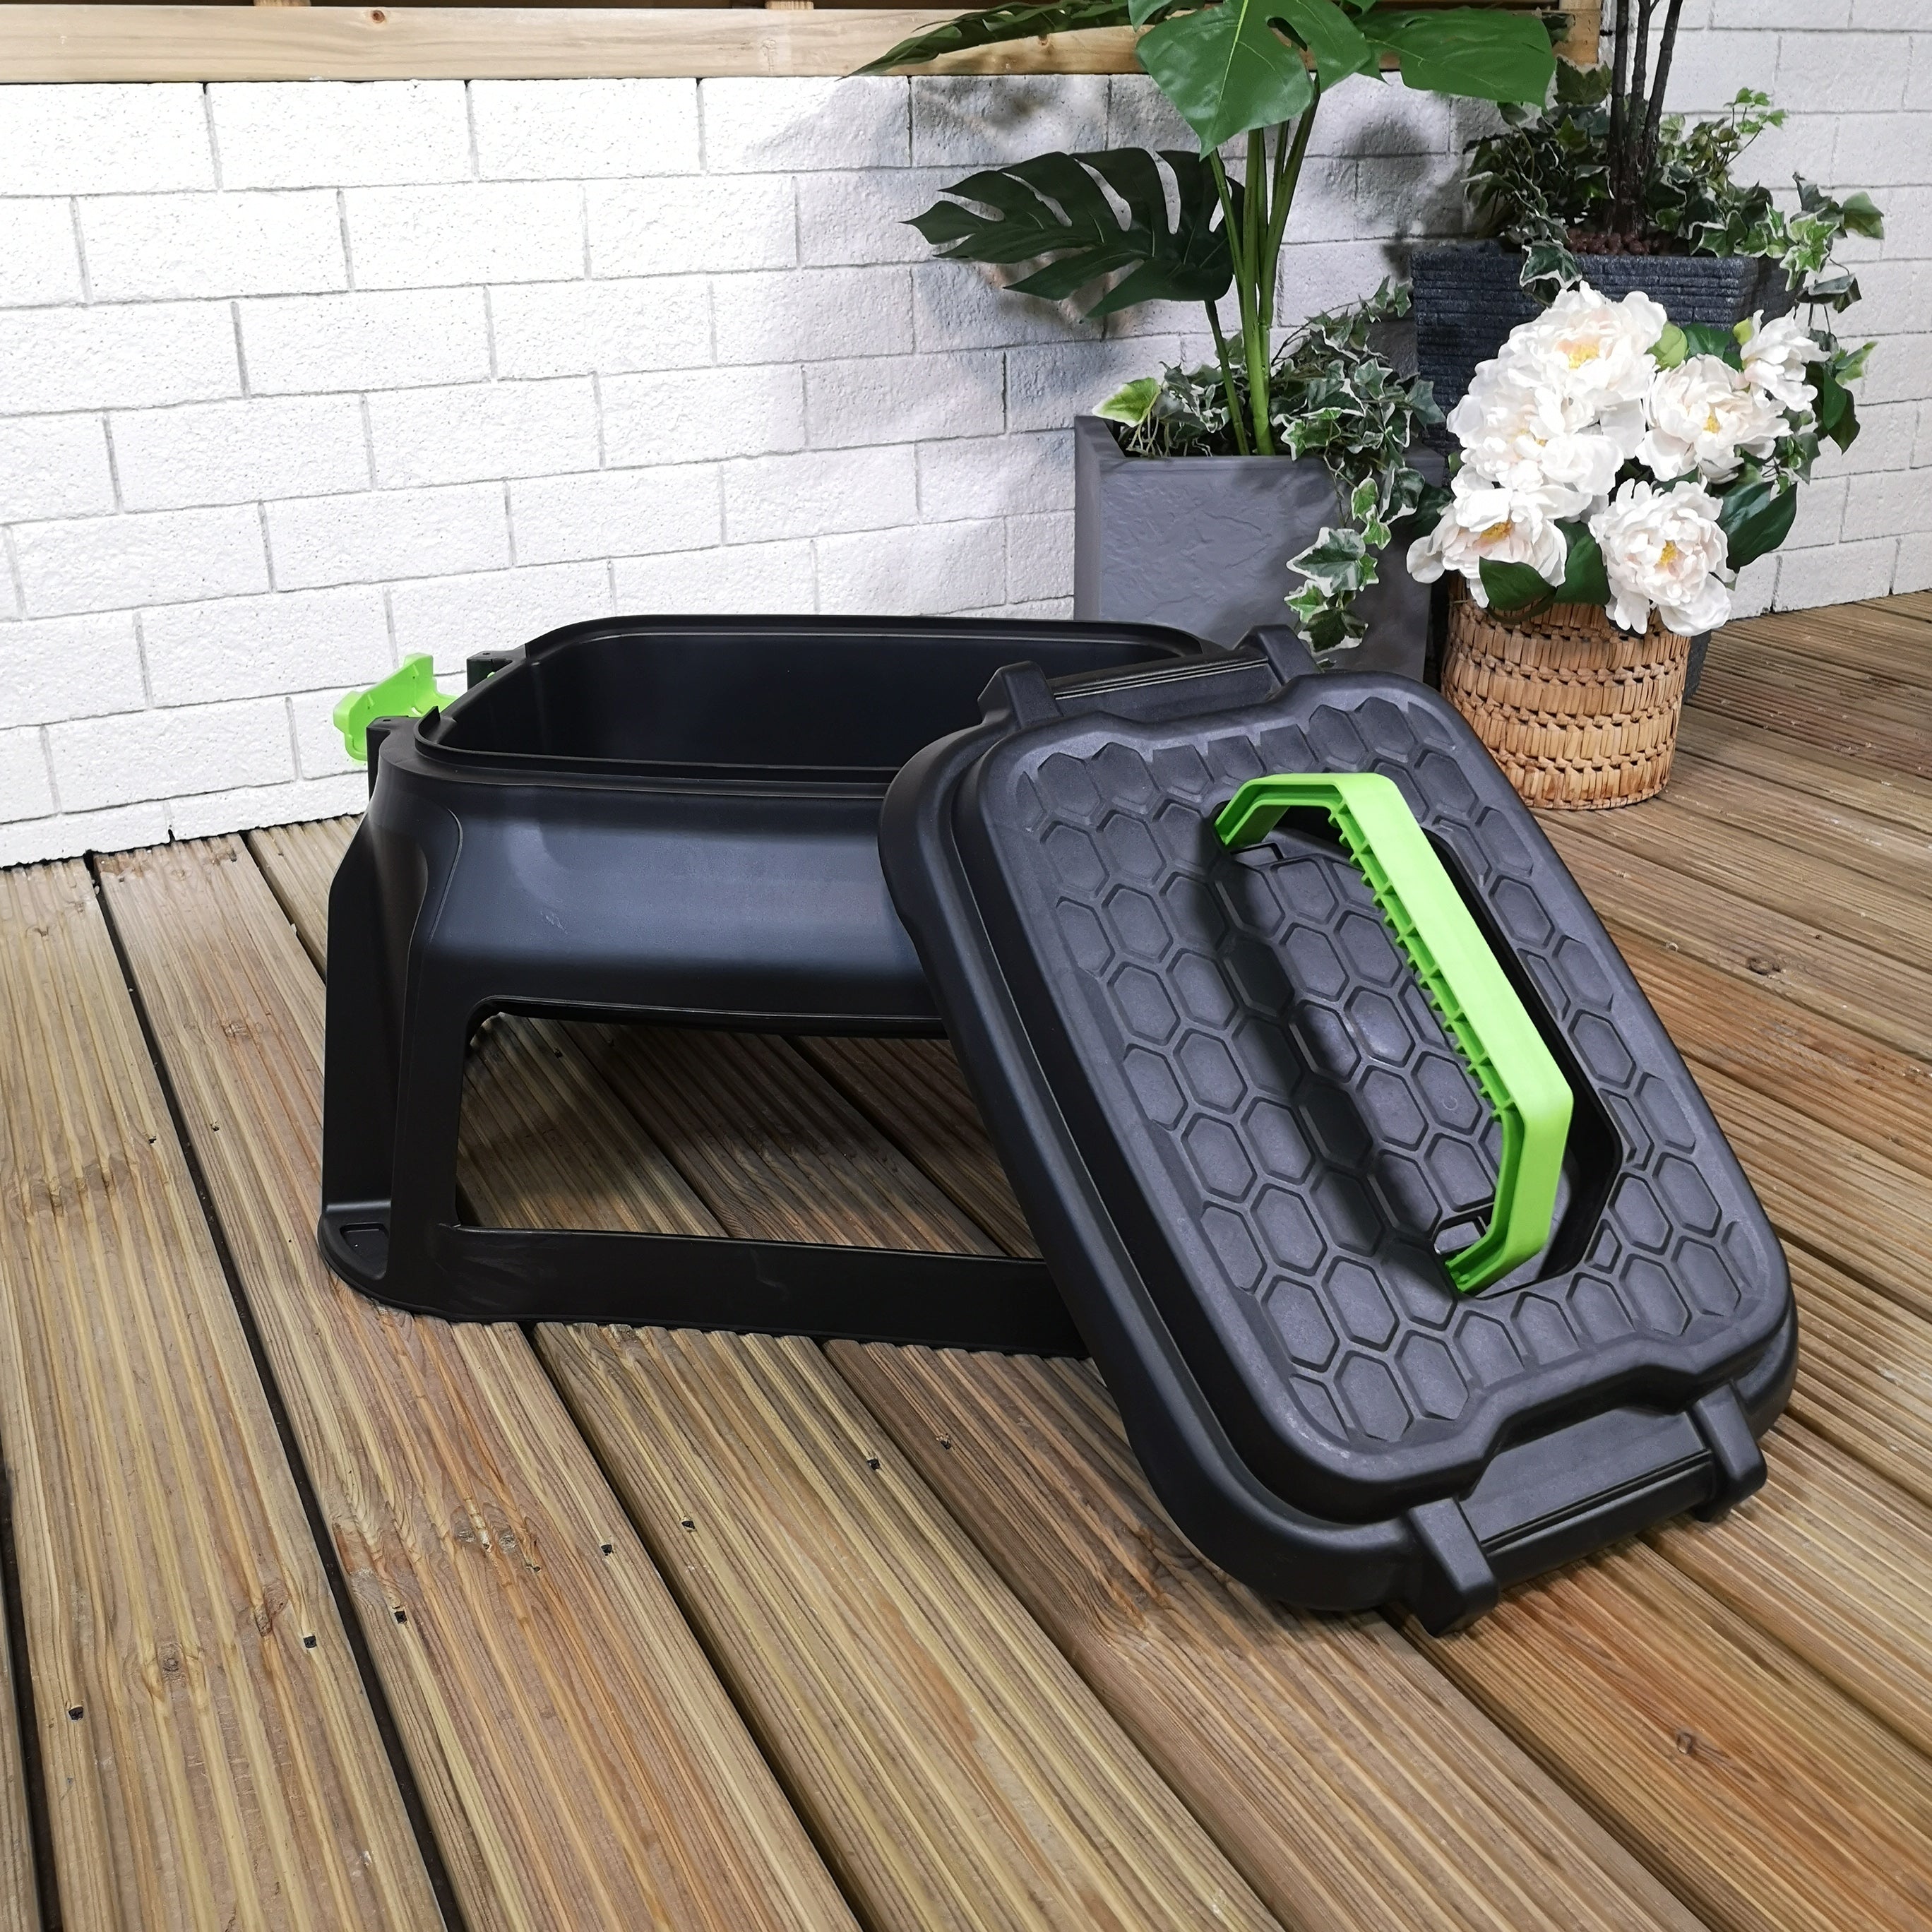 33cm Black and Green Heavy Duty Step Stool with Tool Caddy Storage